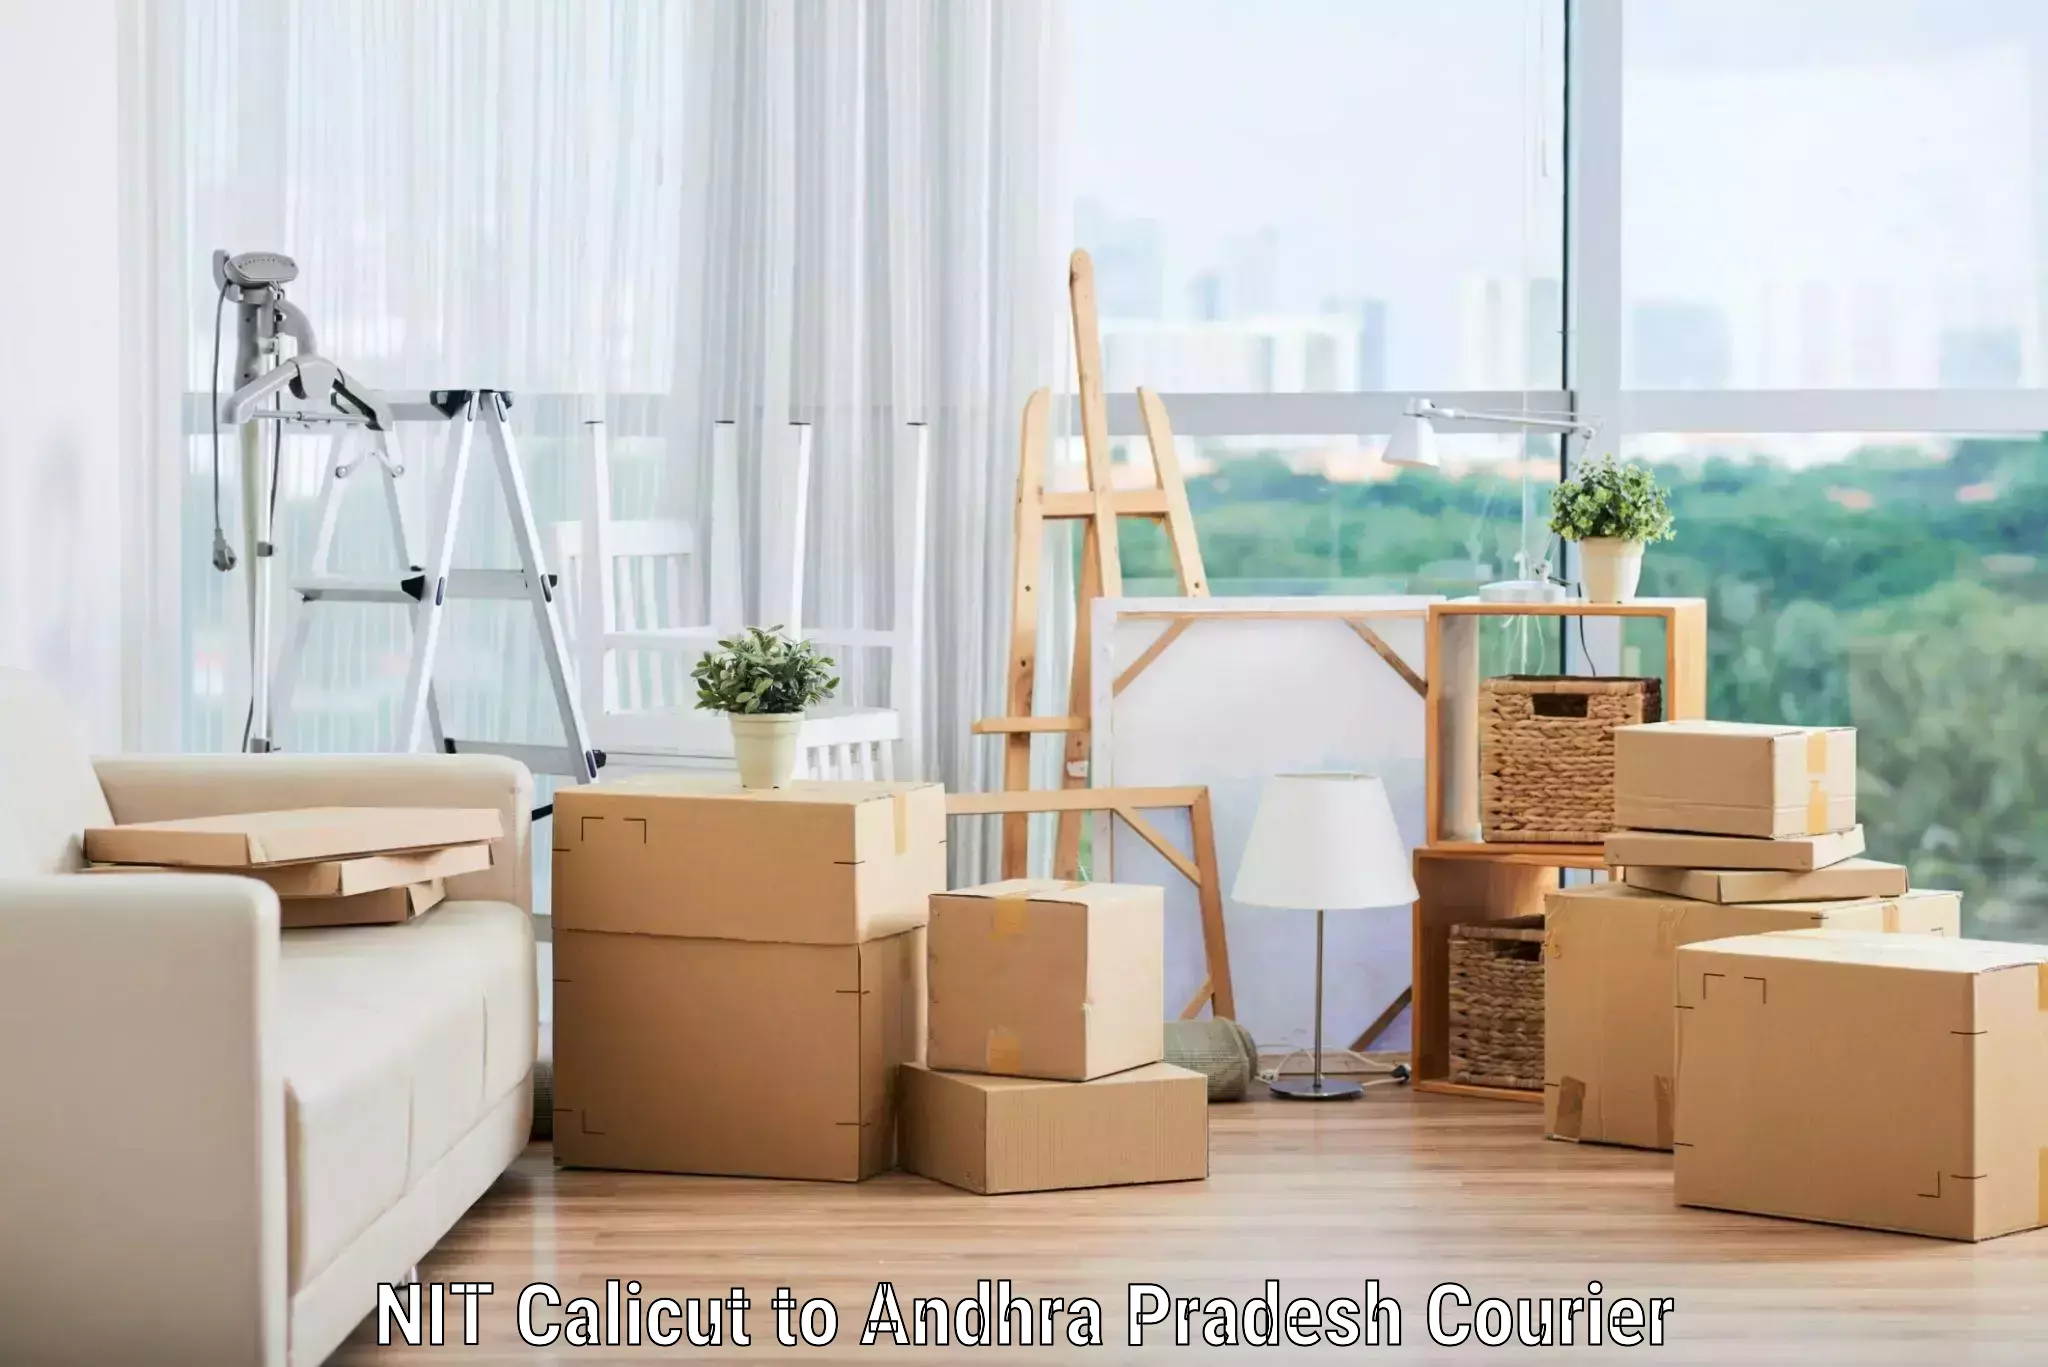 Reliable relocation services NIT Calicut to Pamuru